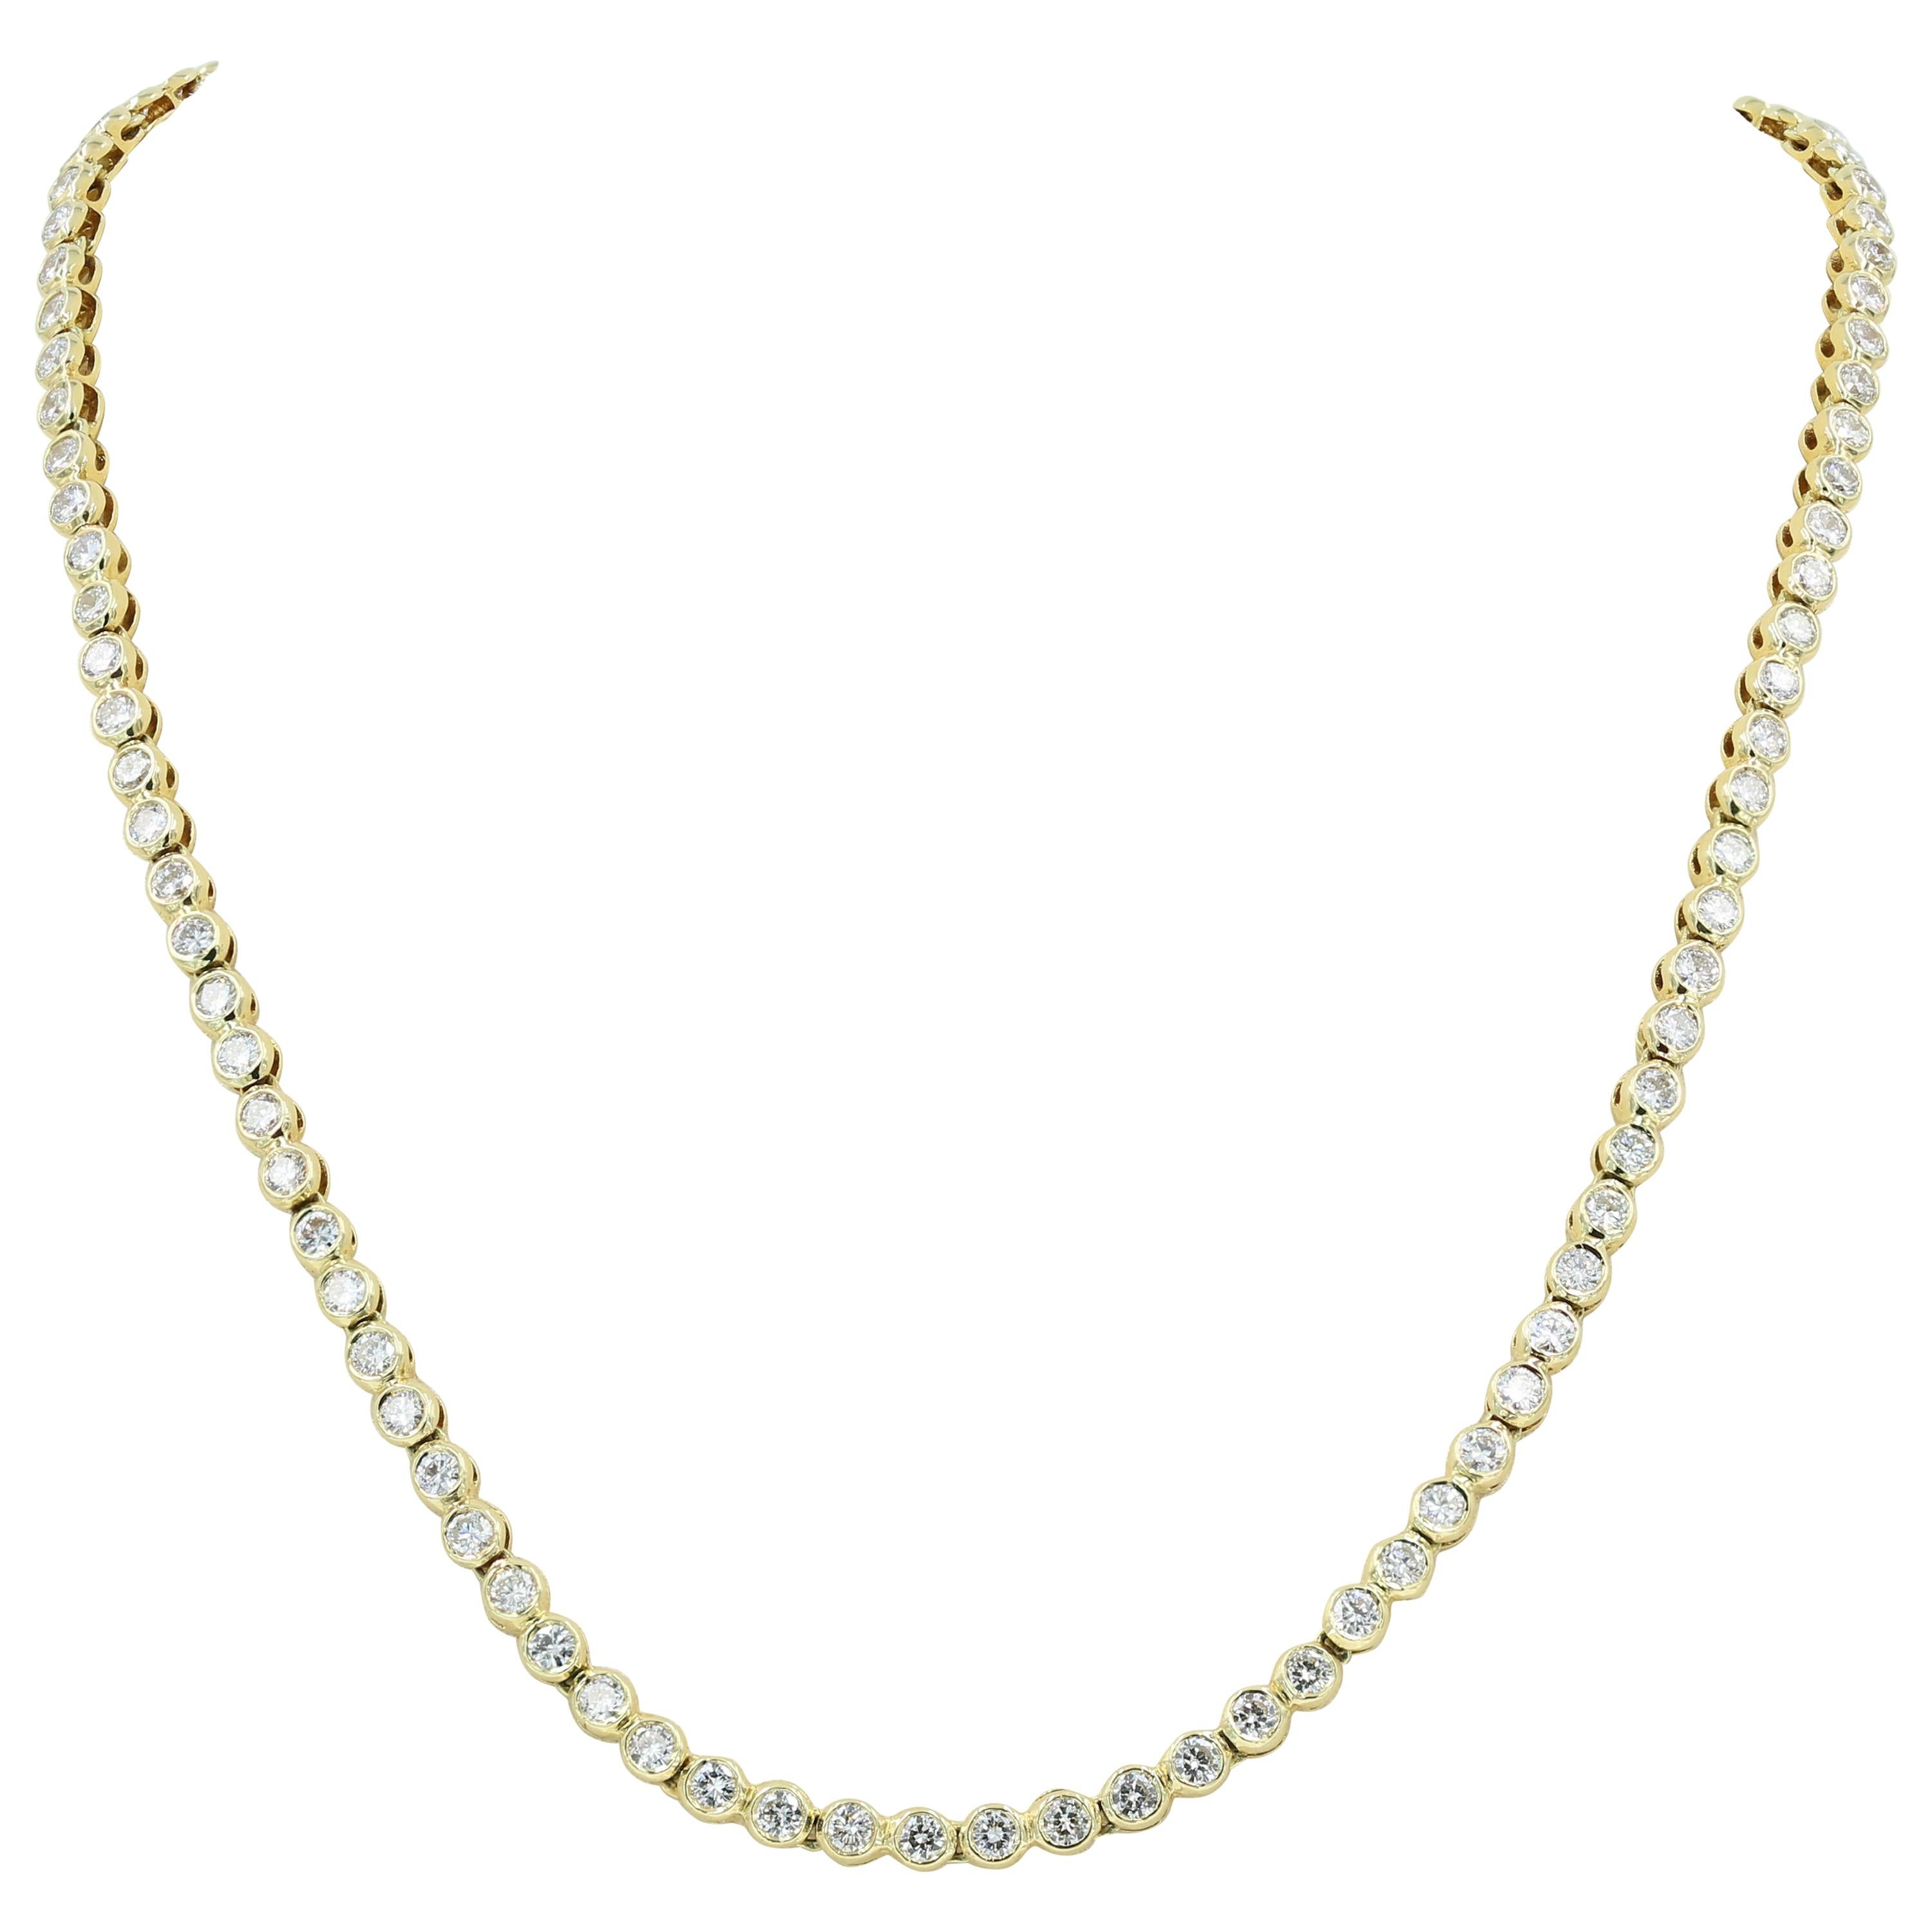 18 Karat Gold Diamond Riviera Necklace with Approximately 7.00 Carat Total